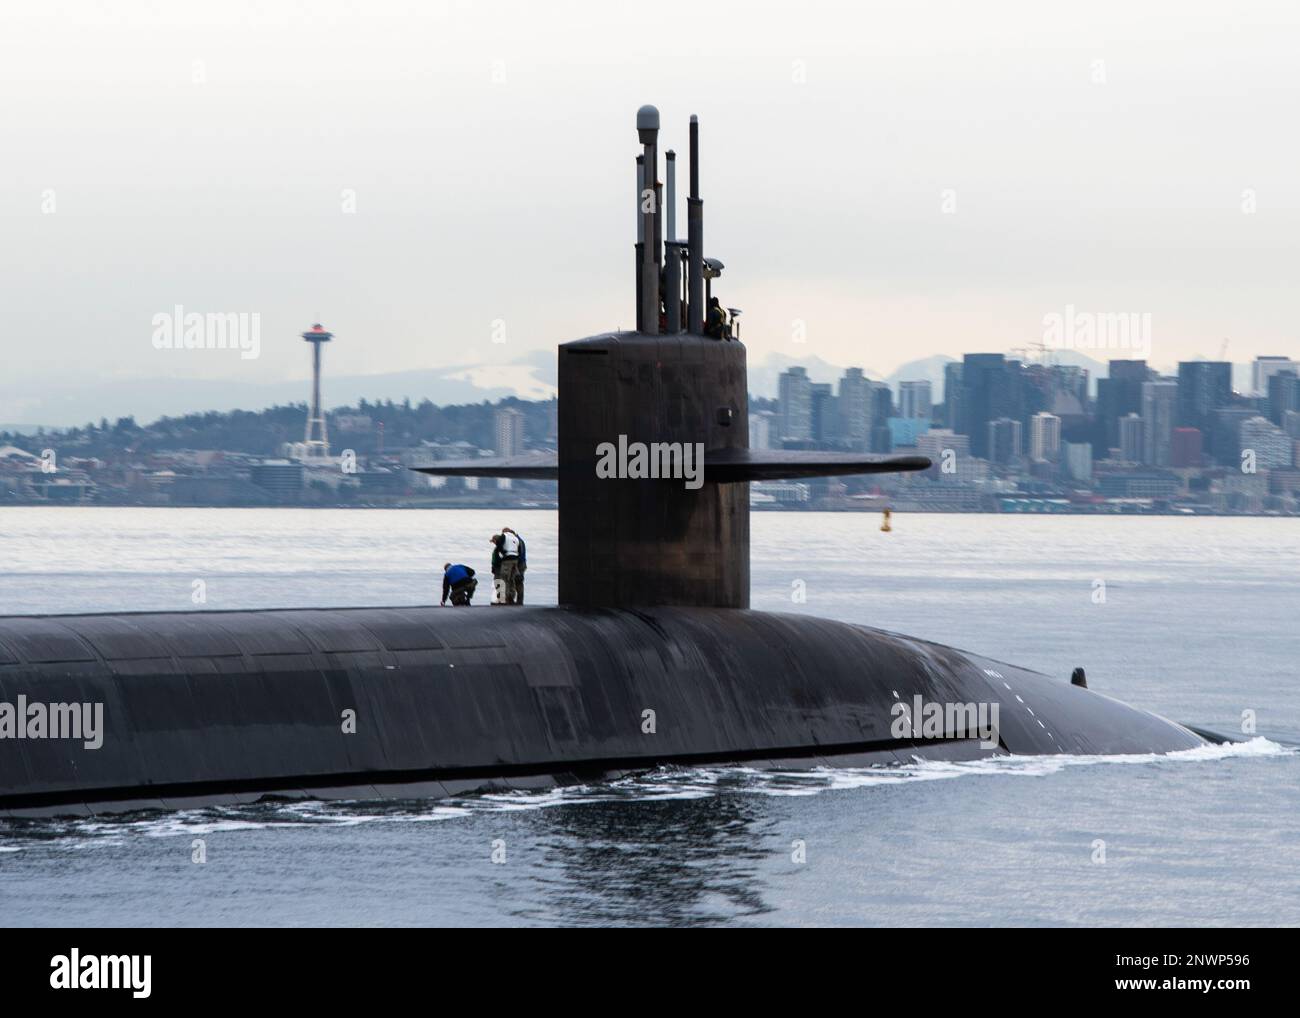 230209-N-ED185-1331  PUGET SOUND, Wash. (Feb. 9, 2023) The Ohio-class ballistic missile submarine USS Louisiana (SSBN 743) transits Puget Sound past the Seattle skyline following a 41-month engineered refueling overhaul at Puget Sound Naval Shipyard and Intermediate Maintenance Facility, February 9, 2023. Louisiana is one of eight ballistic-missile submarines stationed at Naval Base Kitsap-Bangor, providing the most survivable leg of the strategic deterrence triad for the United States. Stock Photo